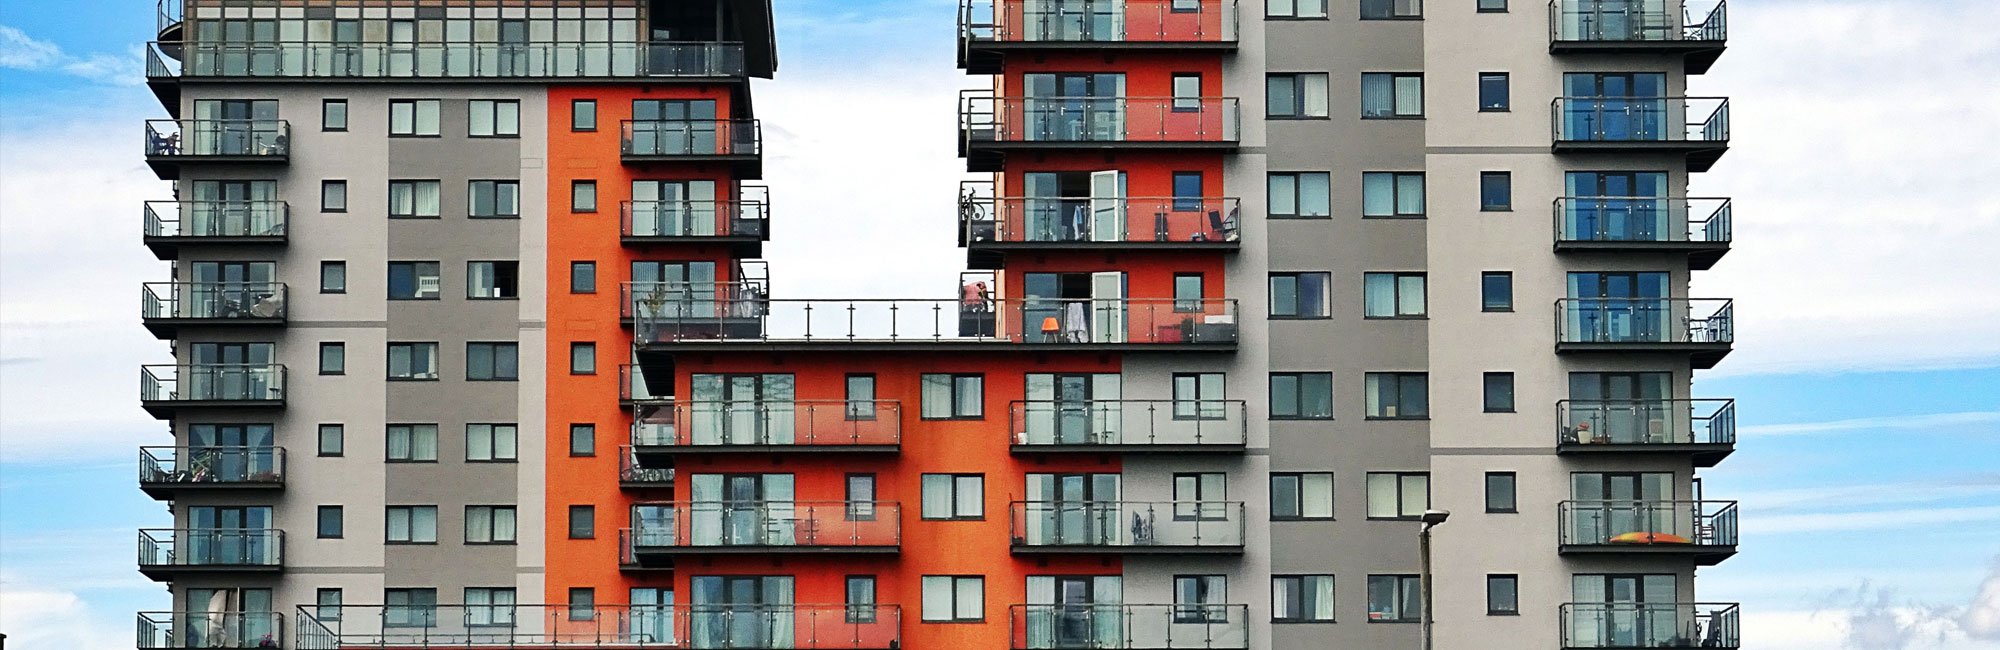 How much should you have in savings before renting an apartment?